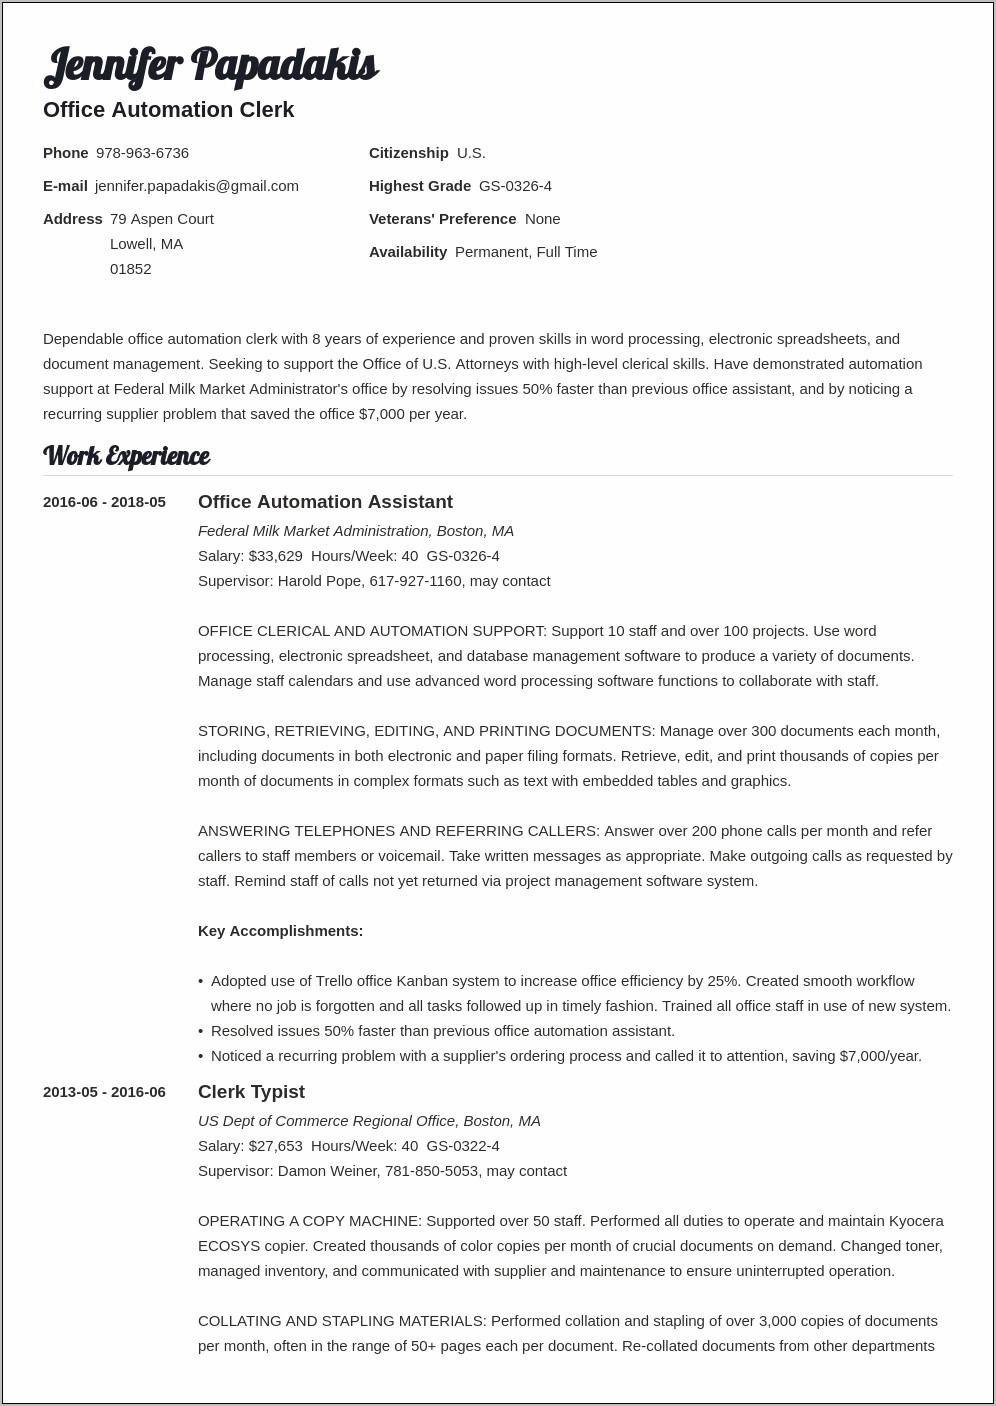 Example Of A Resume For Usajobs.gov